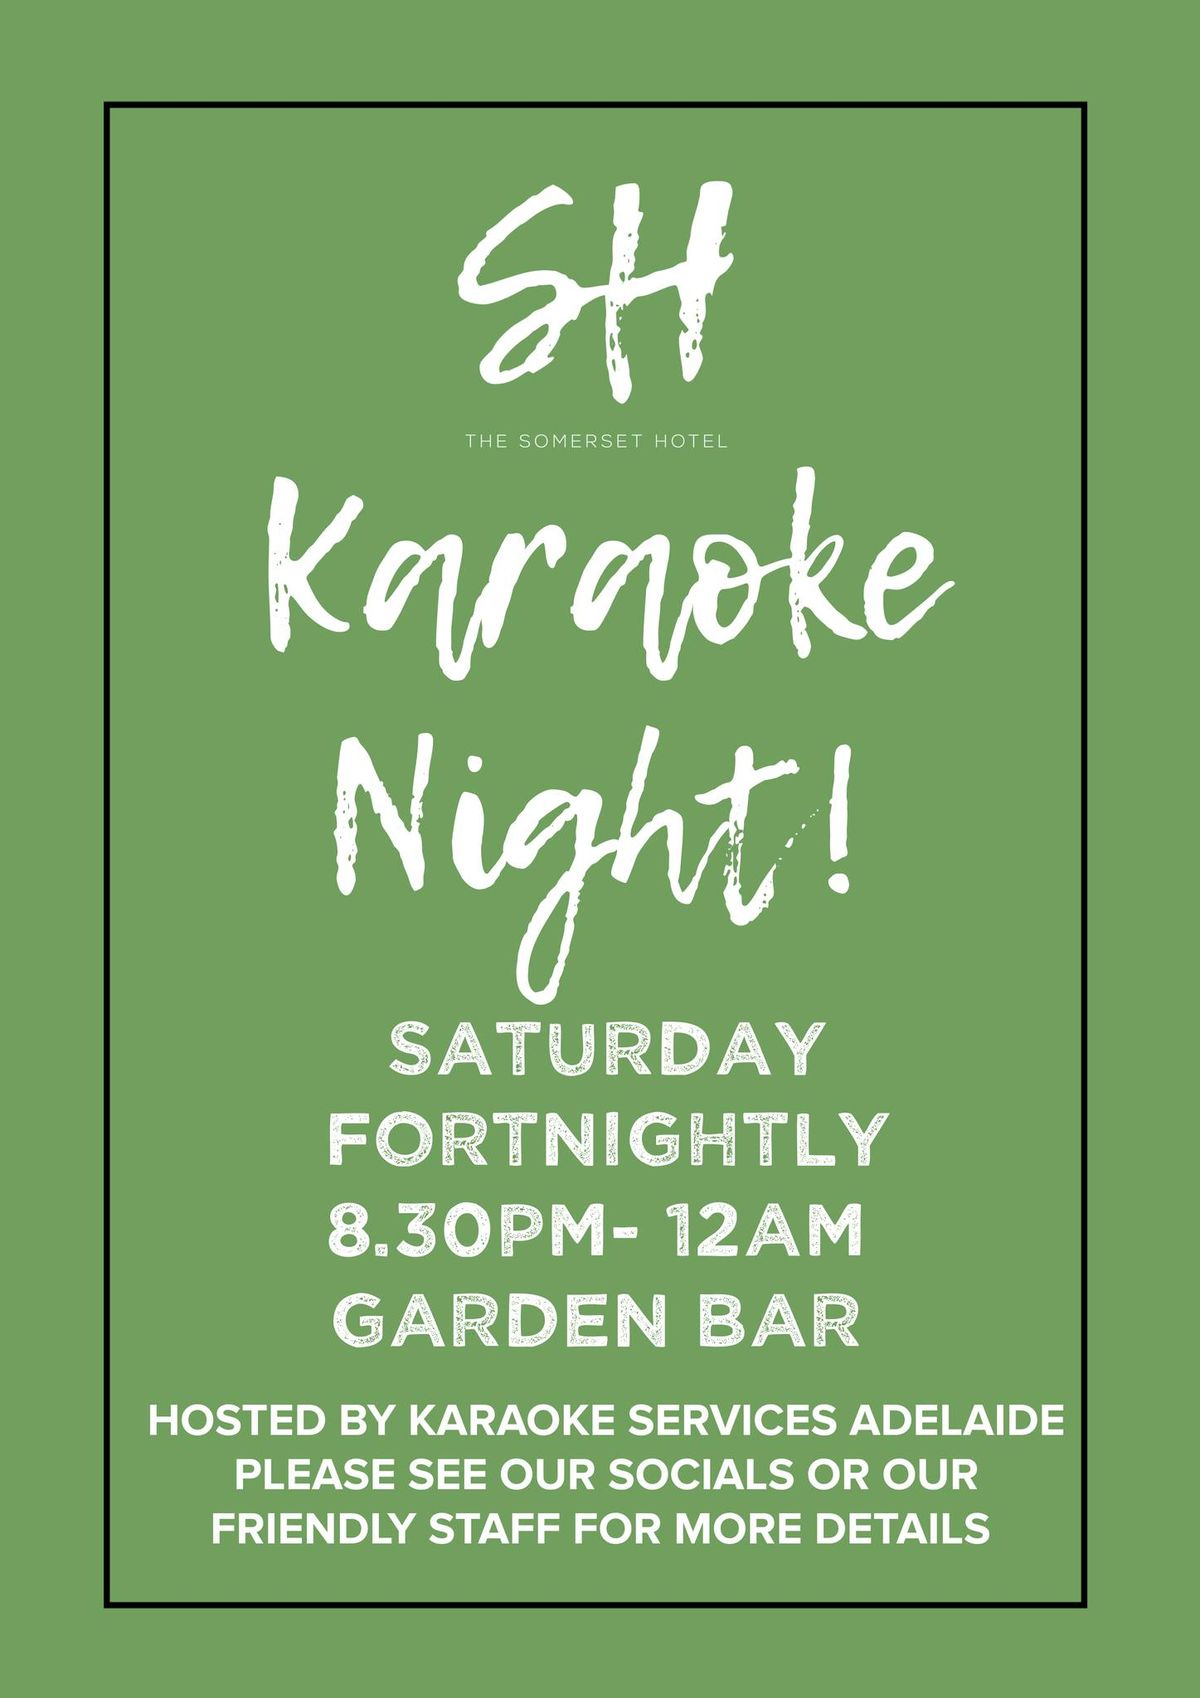 KARAOKE NIGHT AT THE SOMMY!